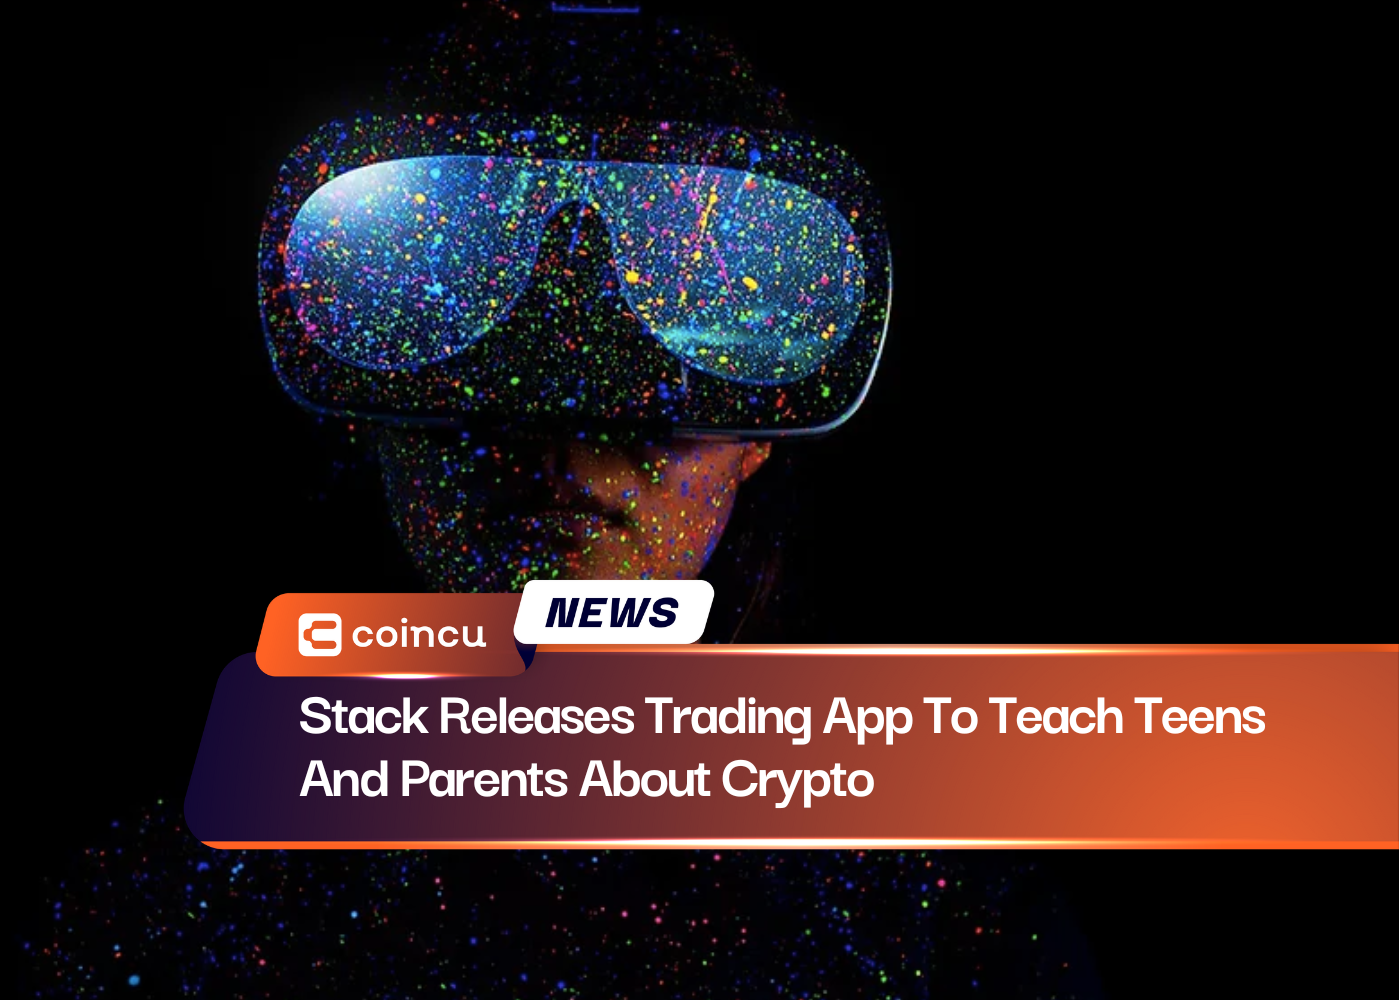 Stack Releases Trading App To Teach Teens And Parents About Crypto